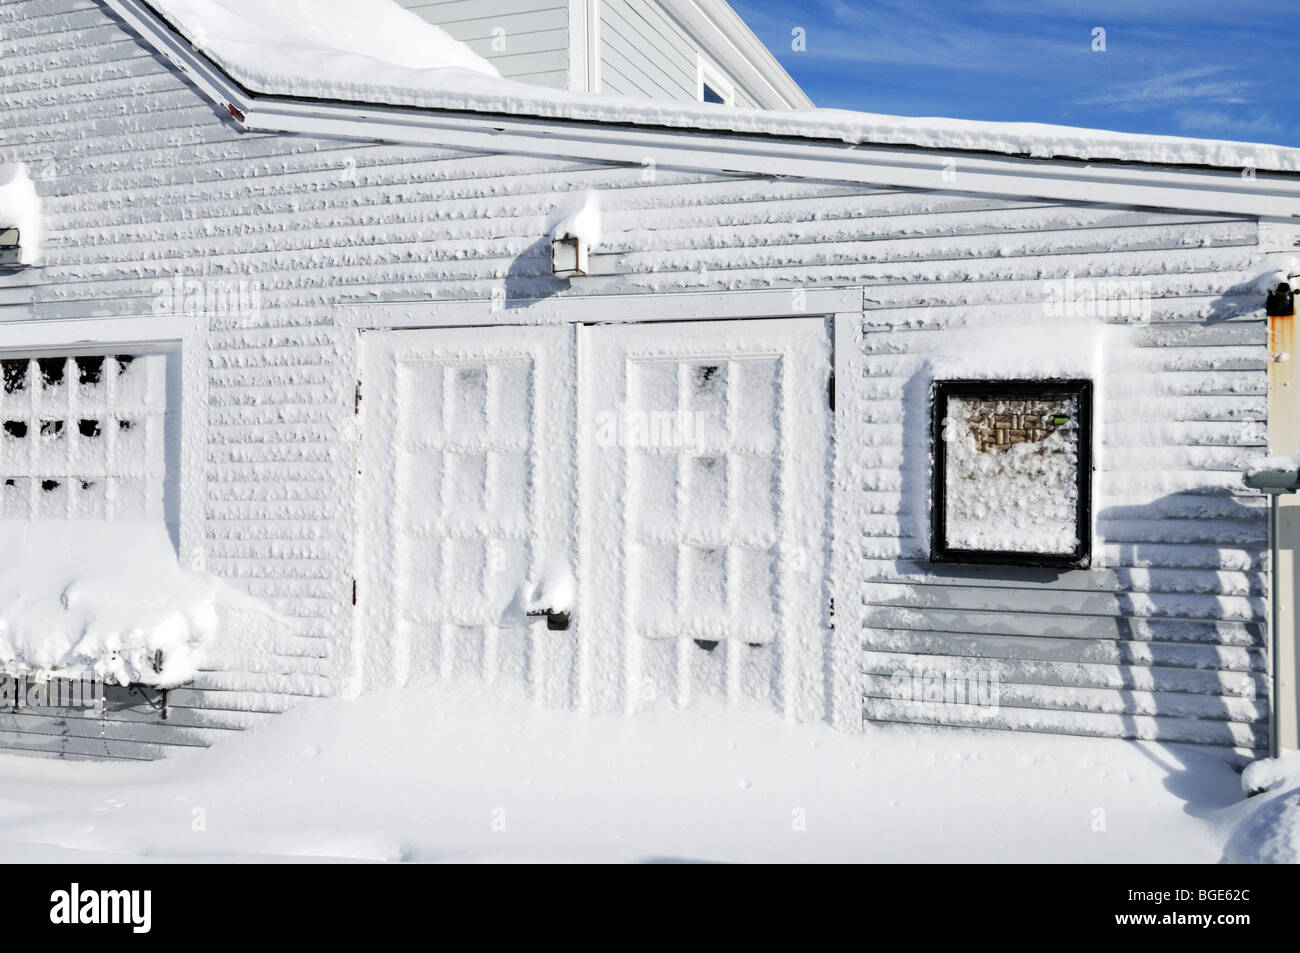 Heavy fresh snowfall on building in Woods Hole, Falmouth Cape Cod Stock Photo